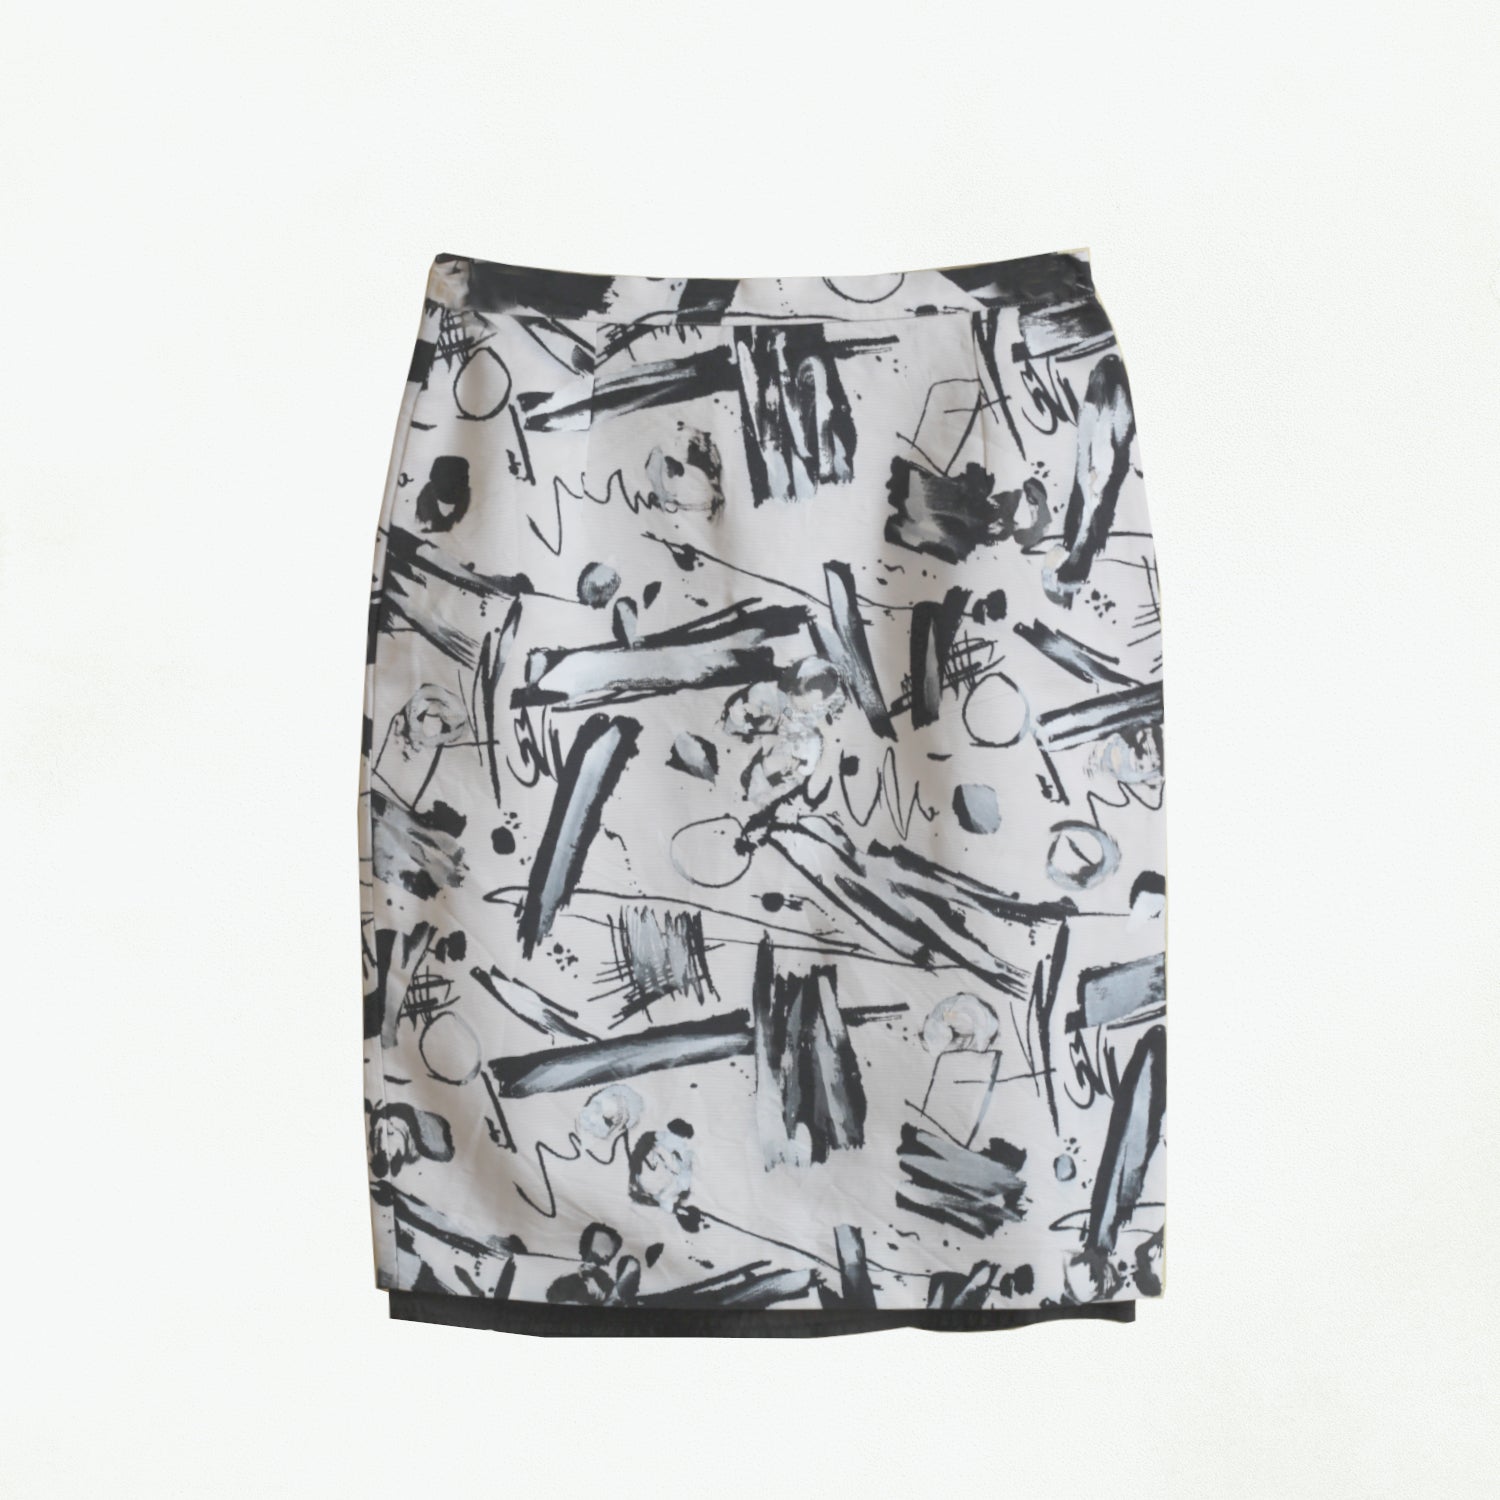 Hand-decorated skirt with abstract pattern